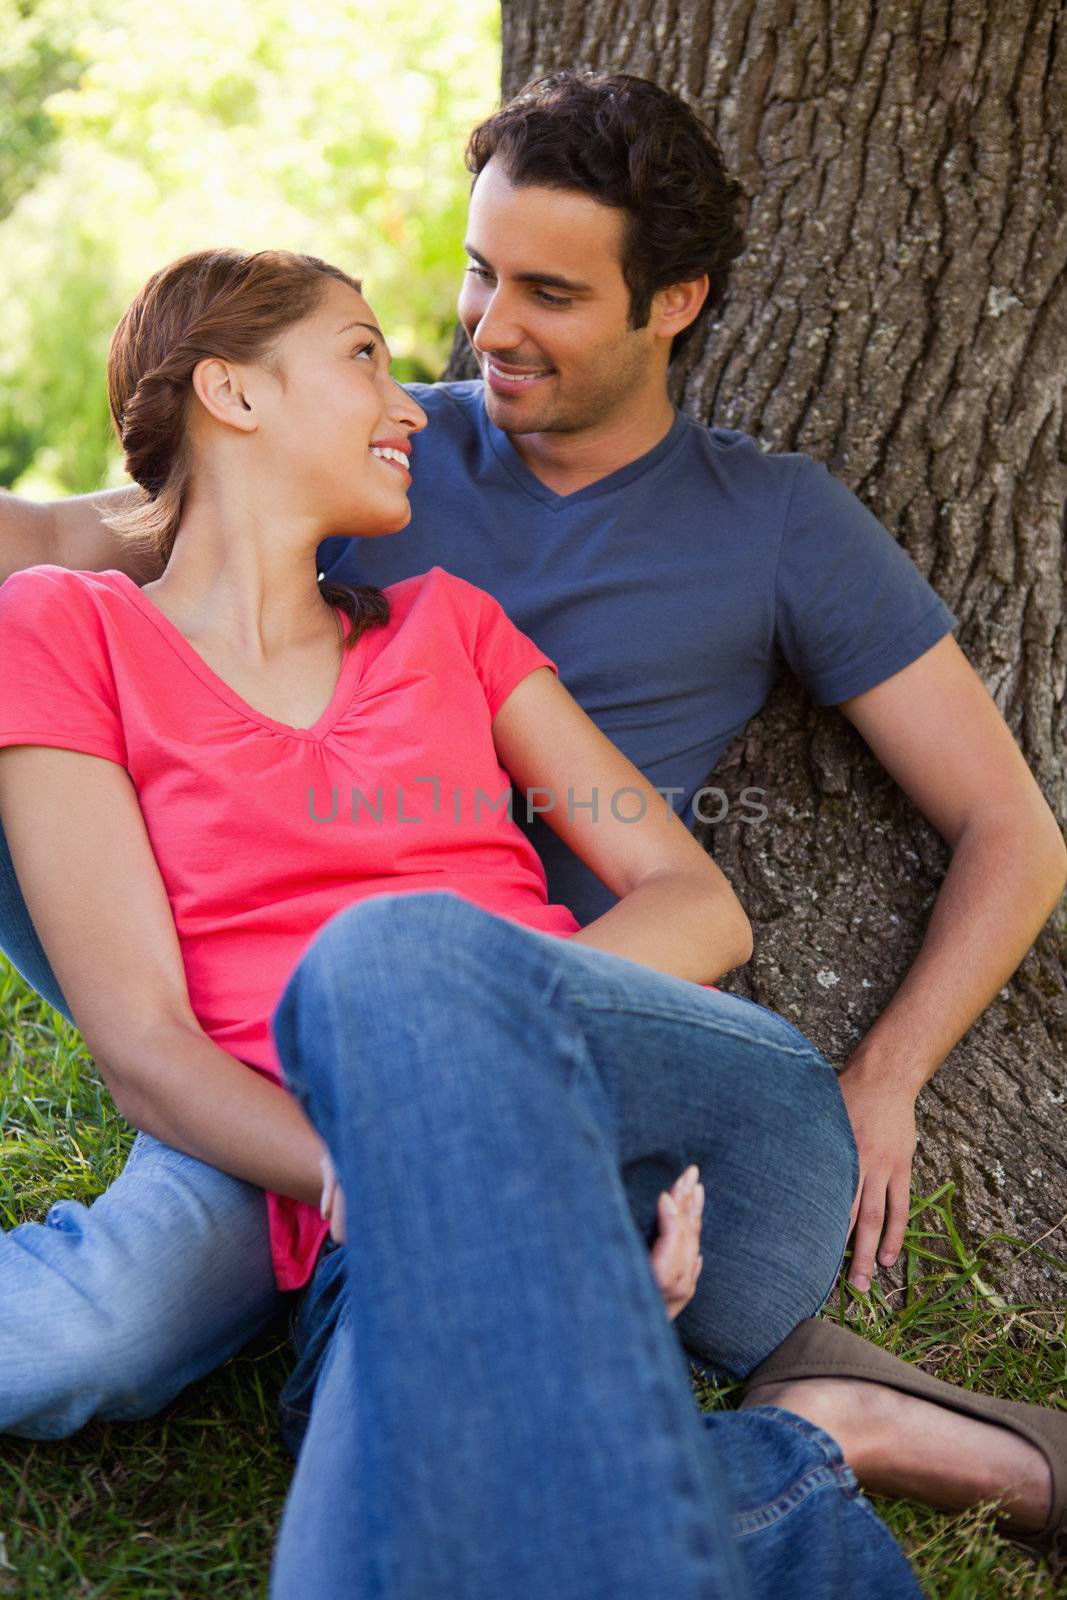 Two friends smiling while looking at each other as they sit together against the trunk of a tree